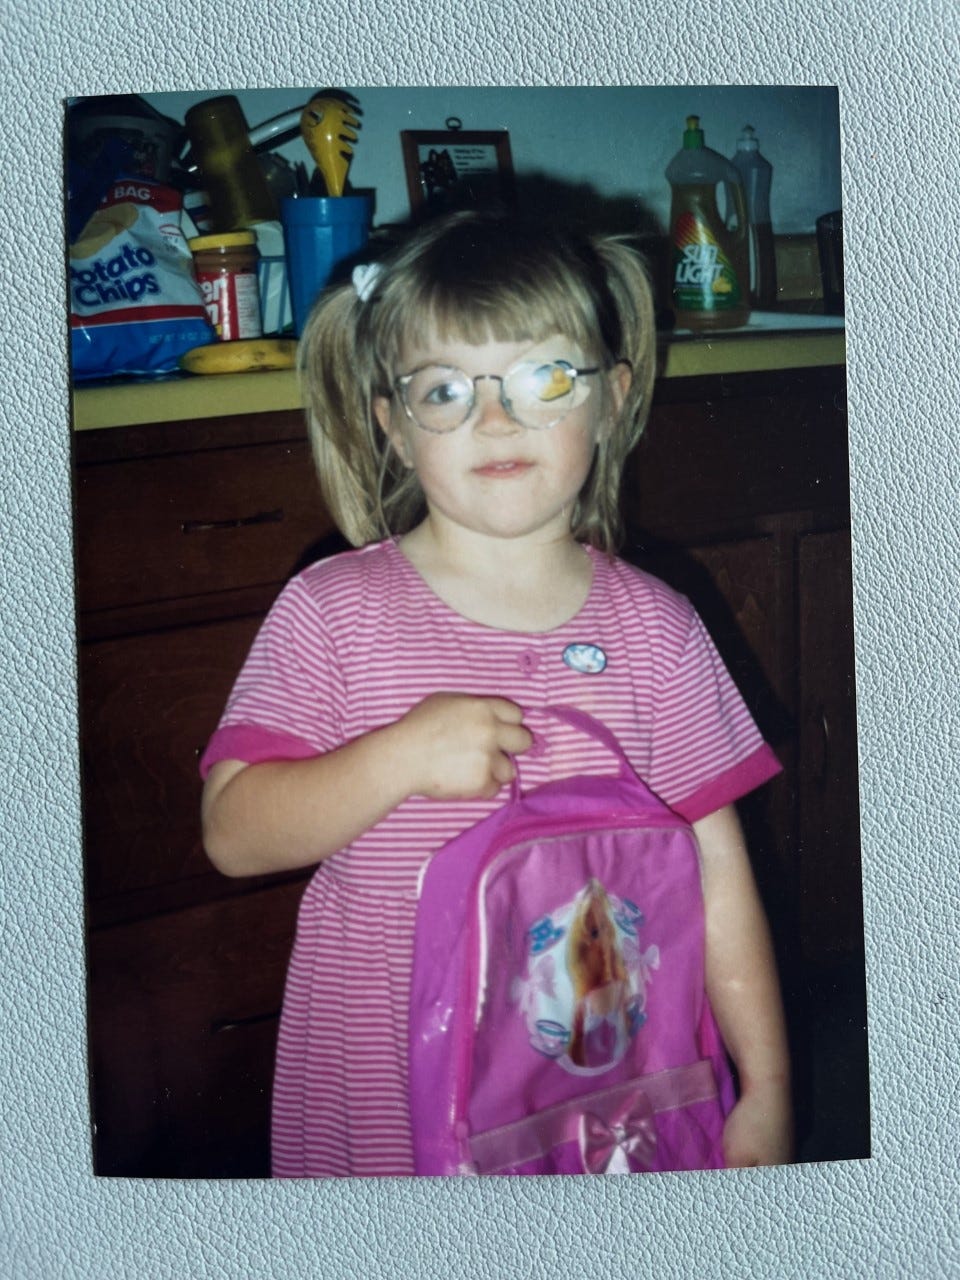 Child wearing a pink holds a backpack.